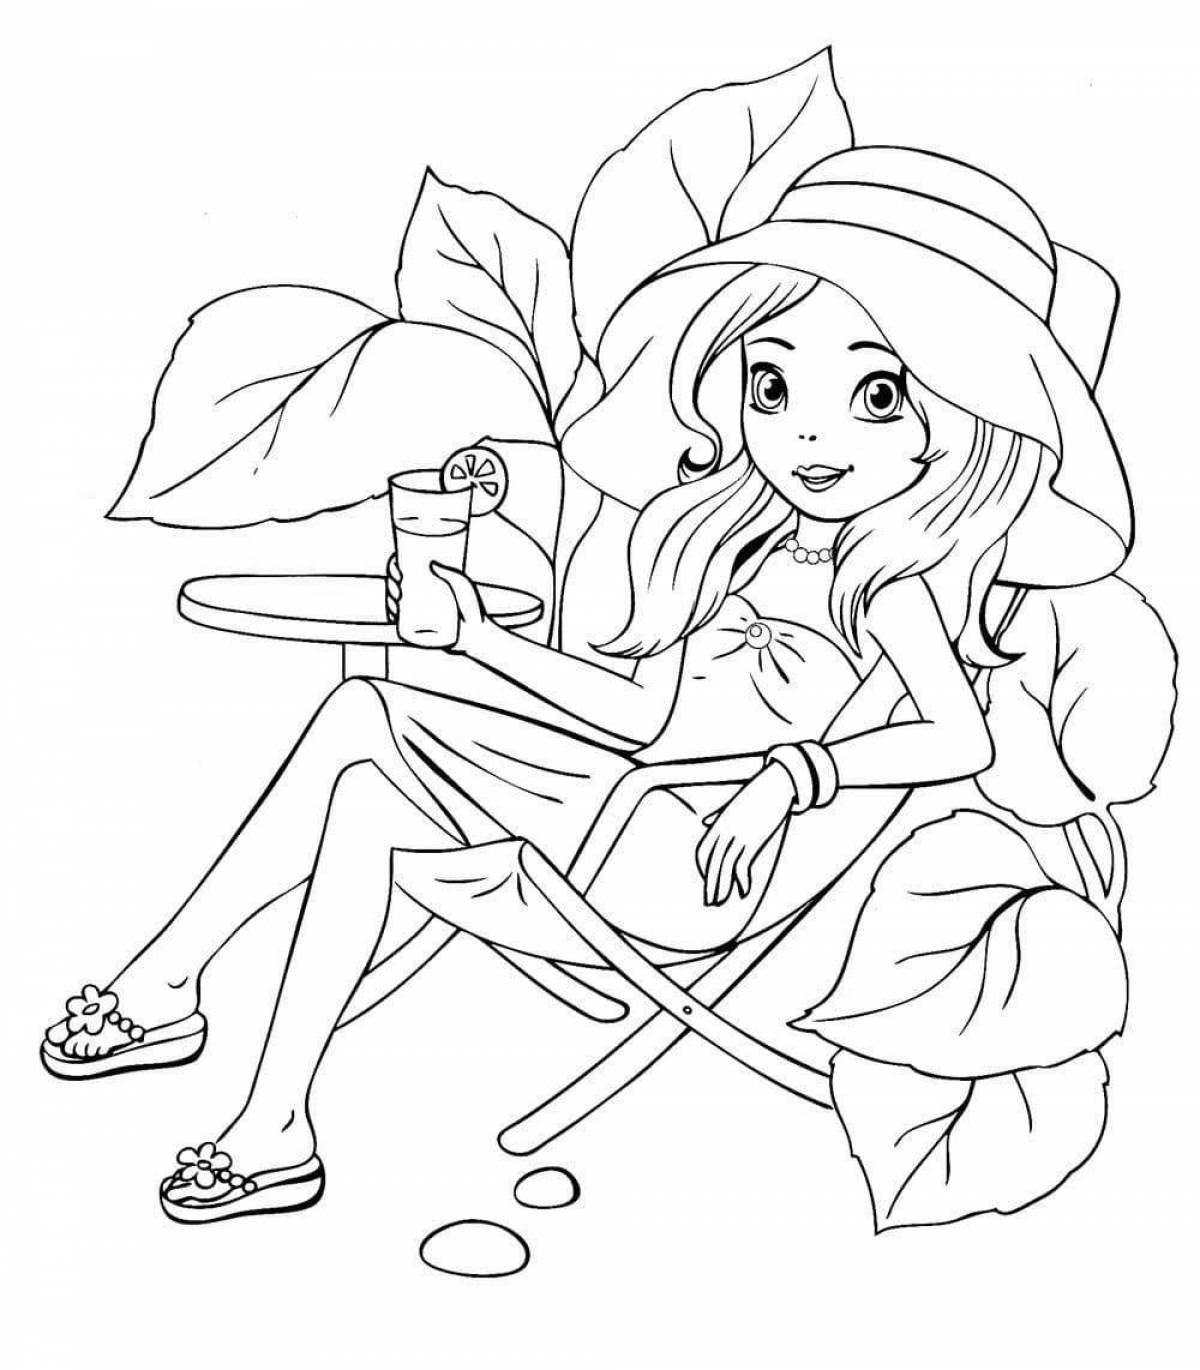 Lovely incantimals coloring page